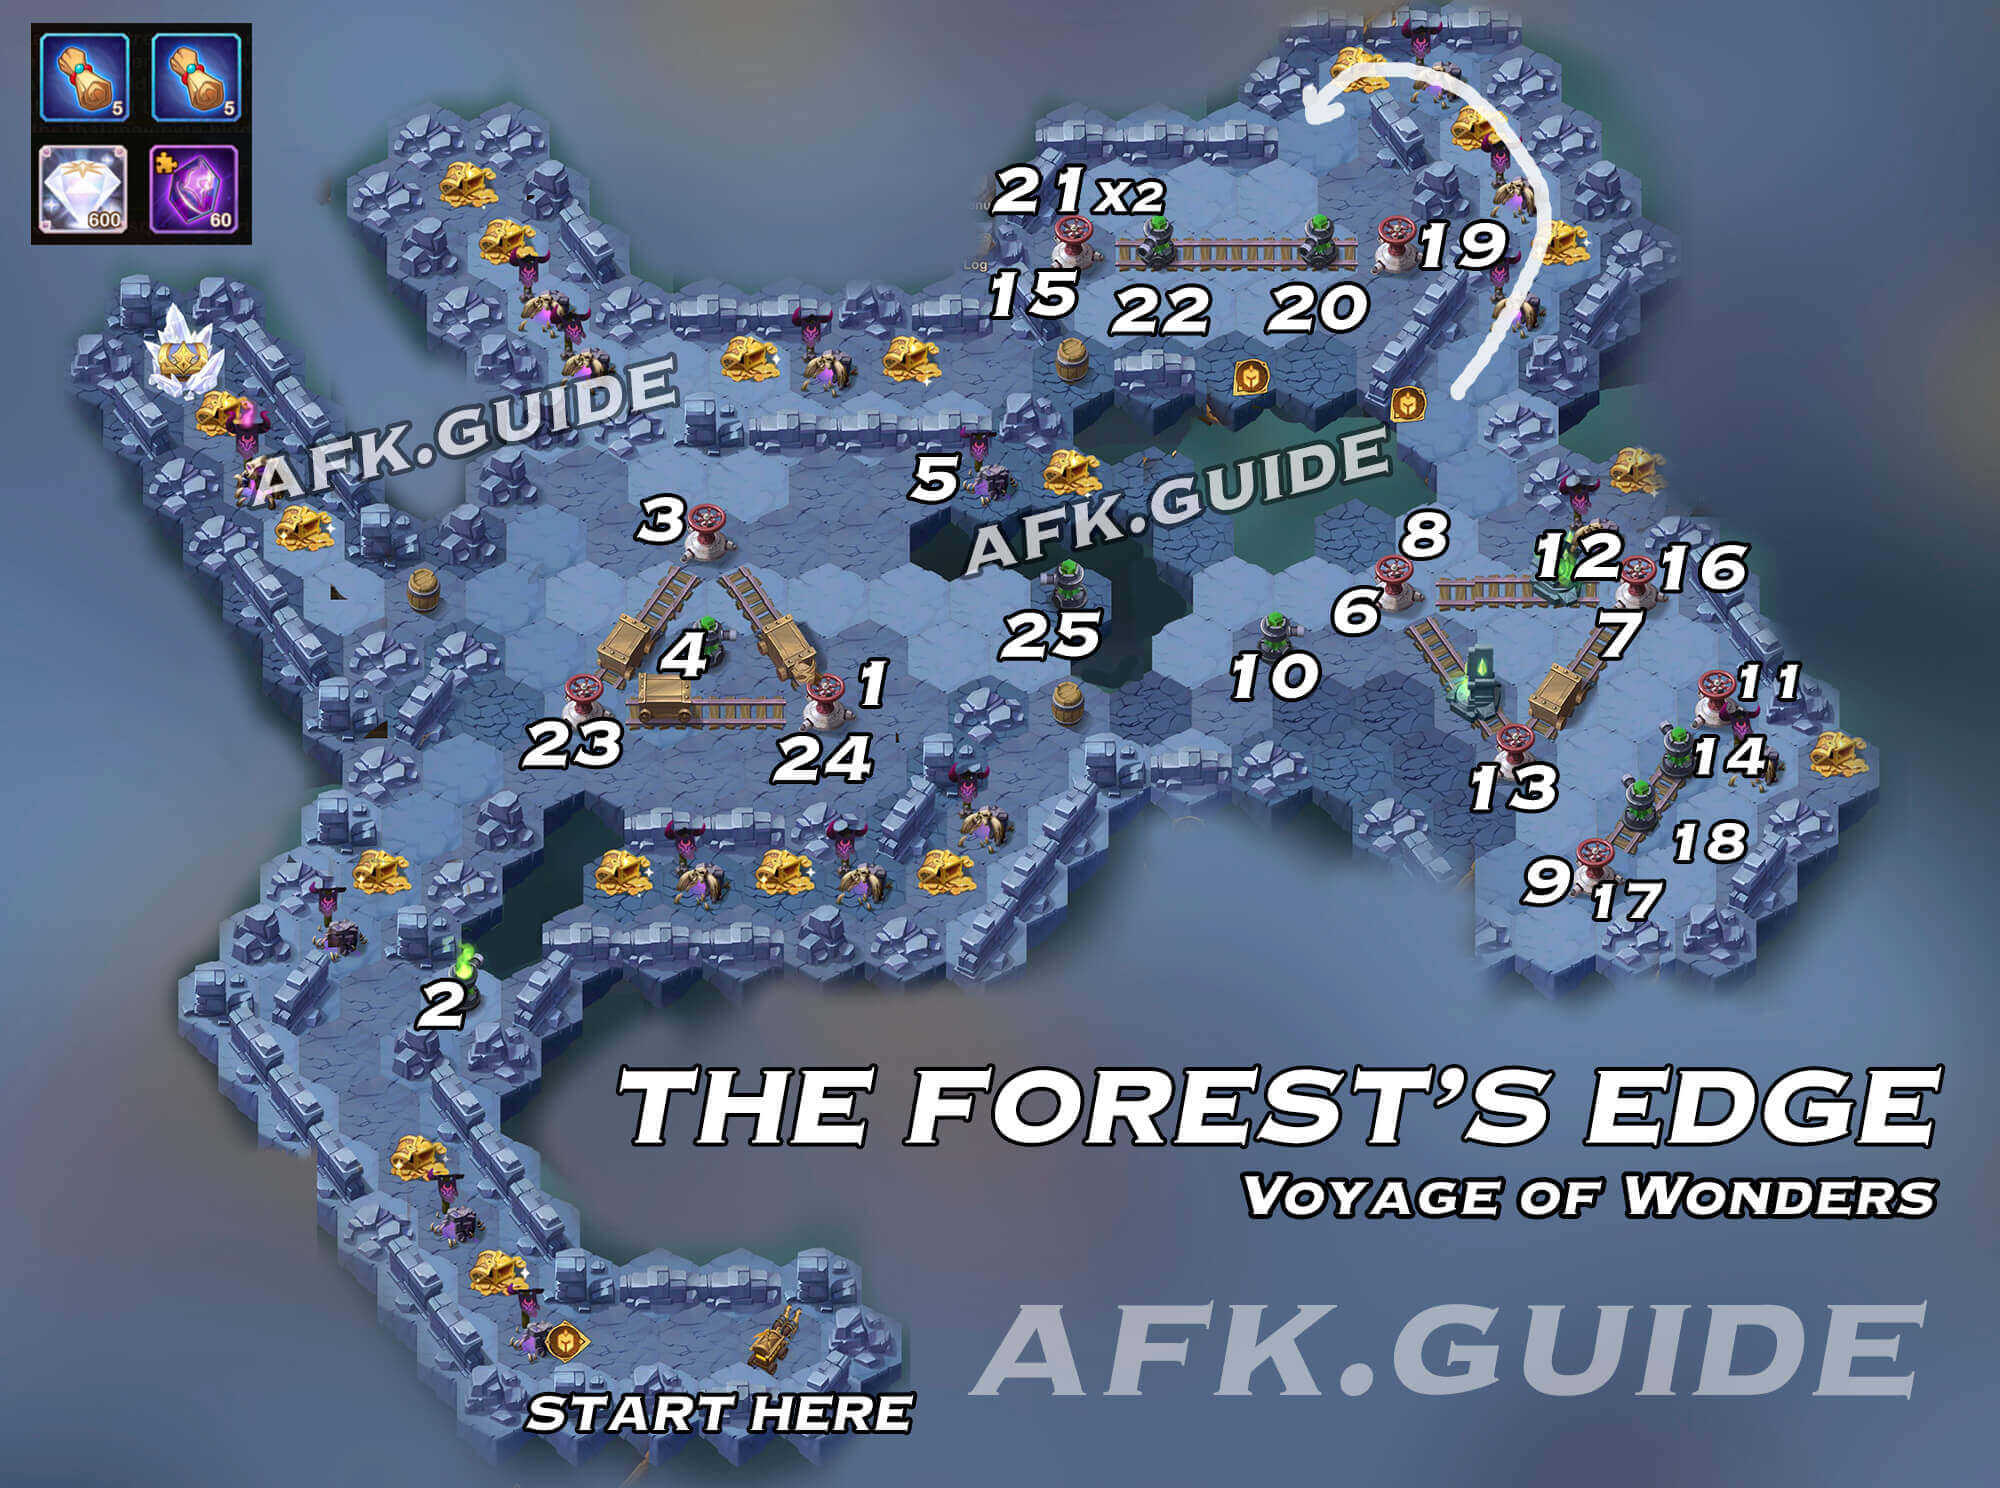 Voyage of Wonders Guide & Map: The Forest's Edge